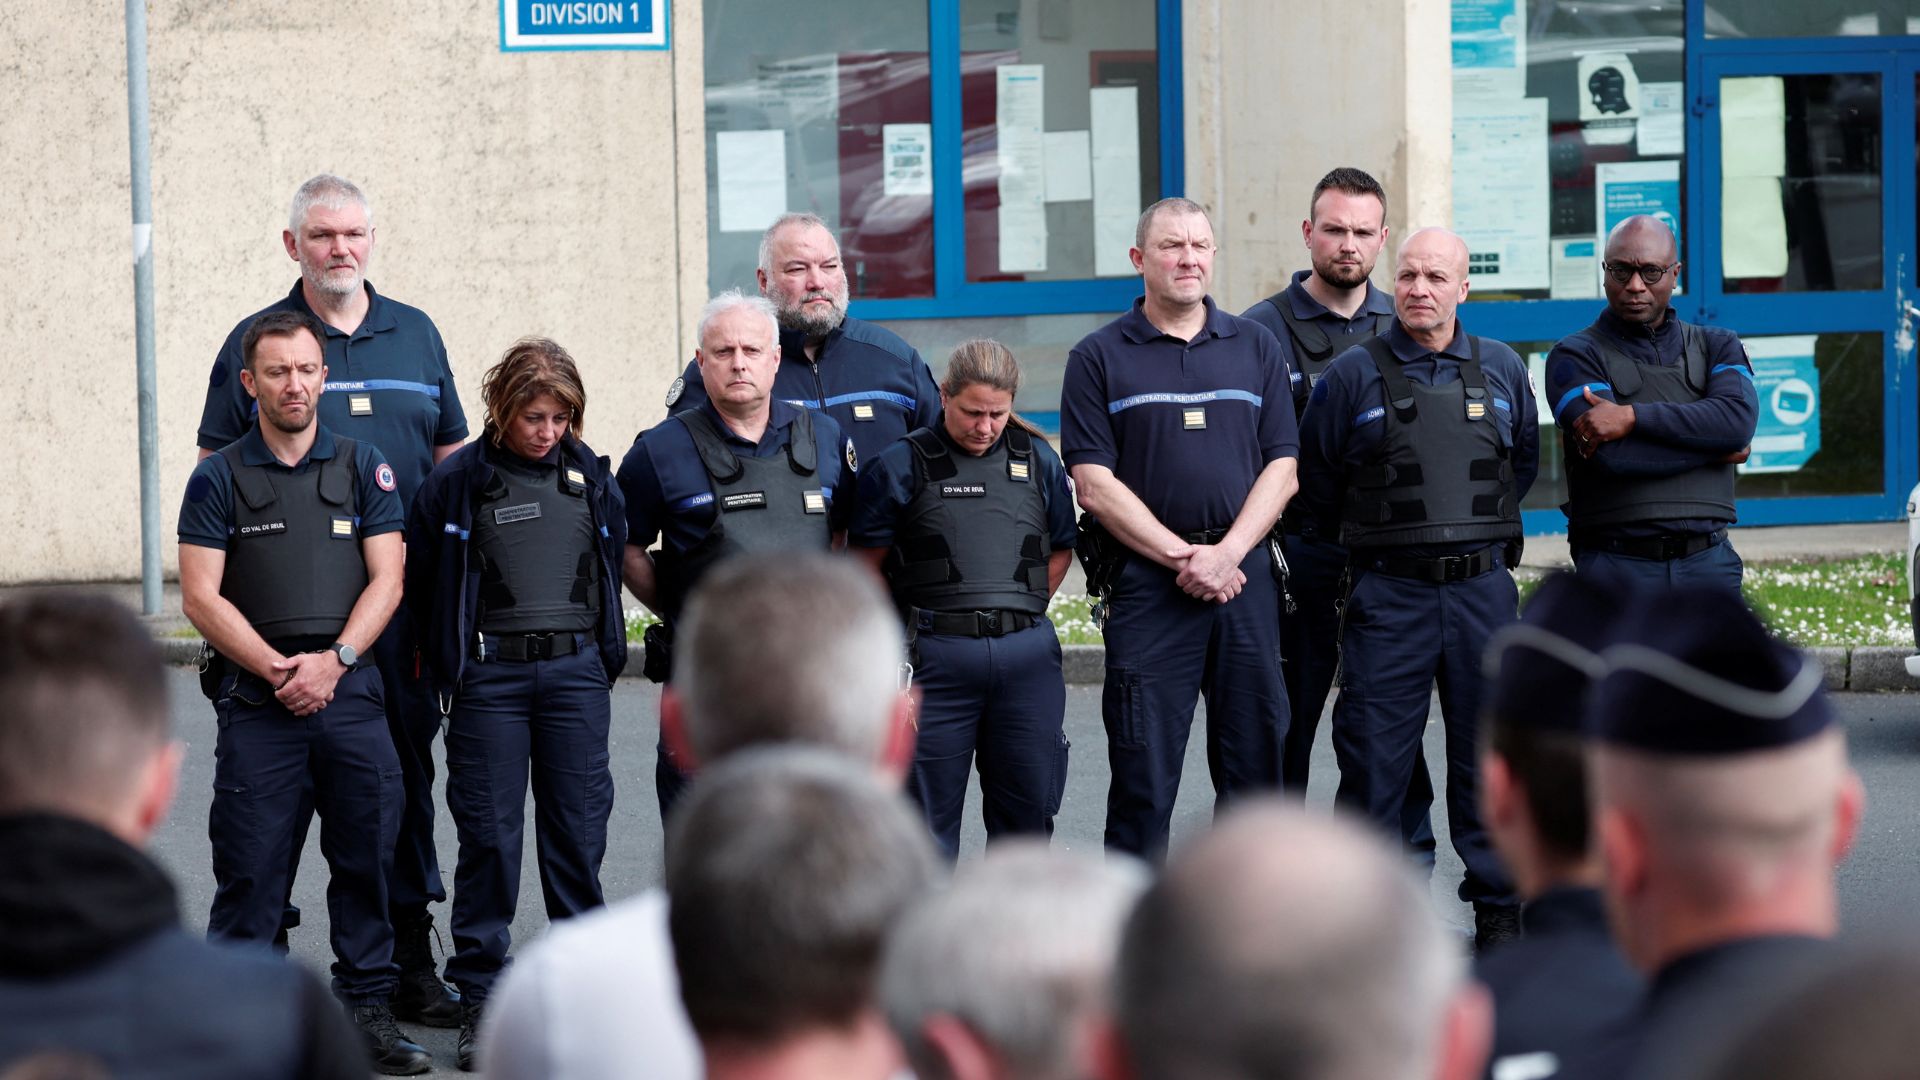 Prison staff observe a moment of silence after two prison guards were killed during a prison van escape. /Gonzalo Fuentes/Reuters